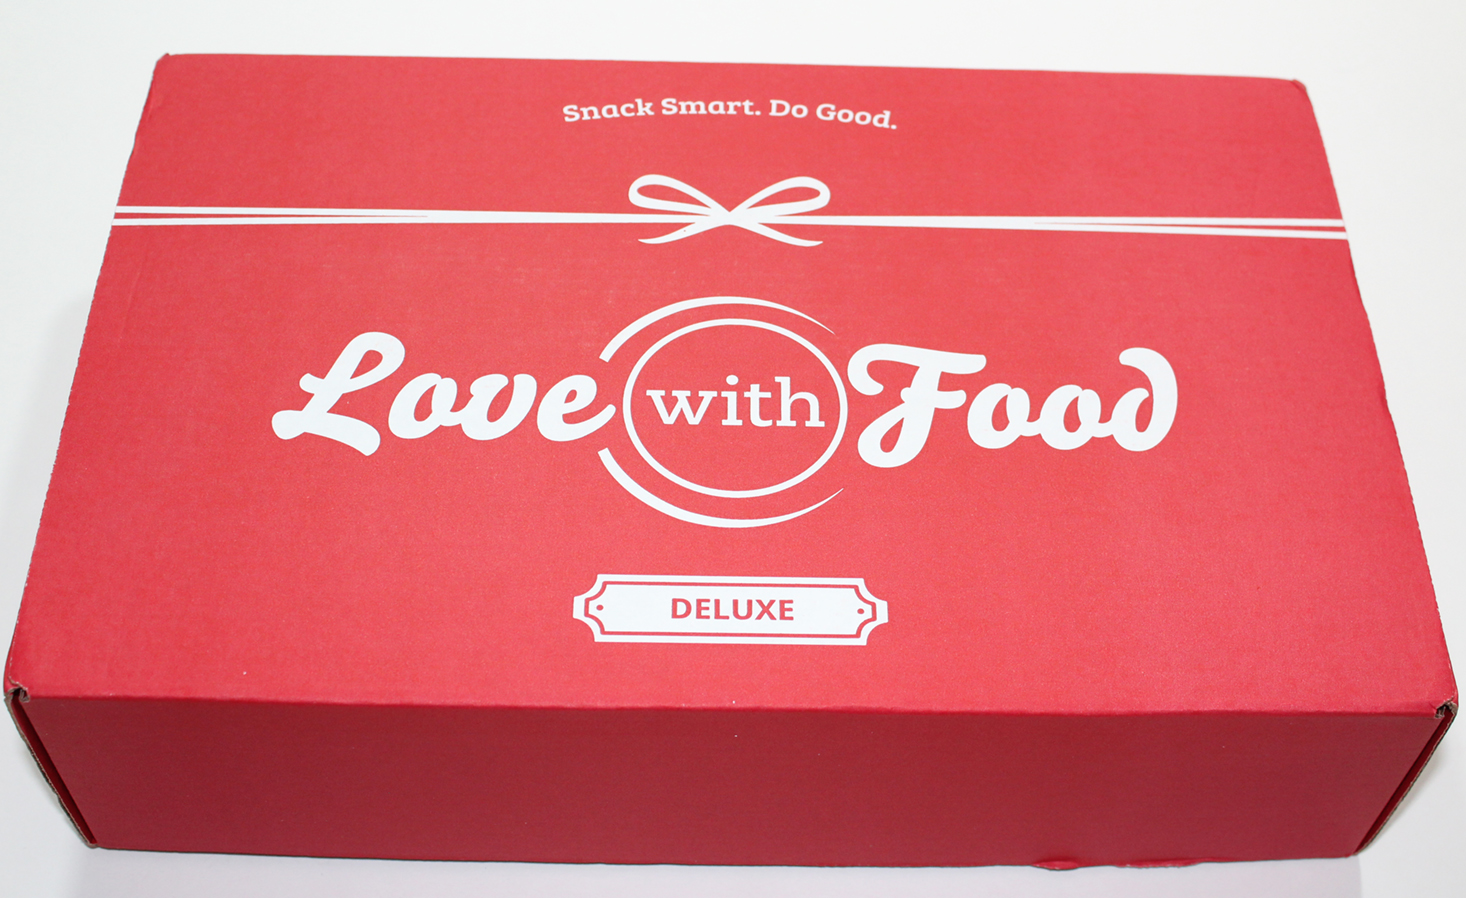 love-with-food-deluxe-february-2017-box